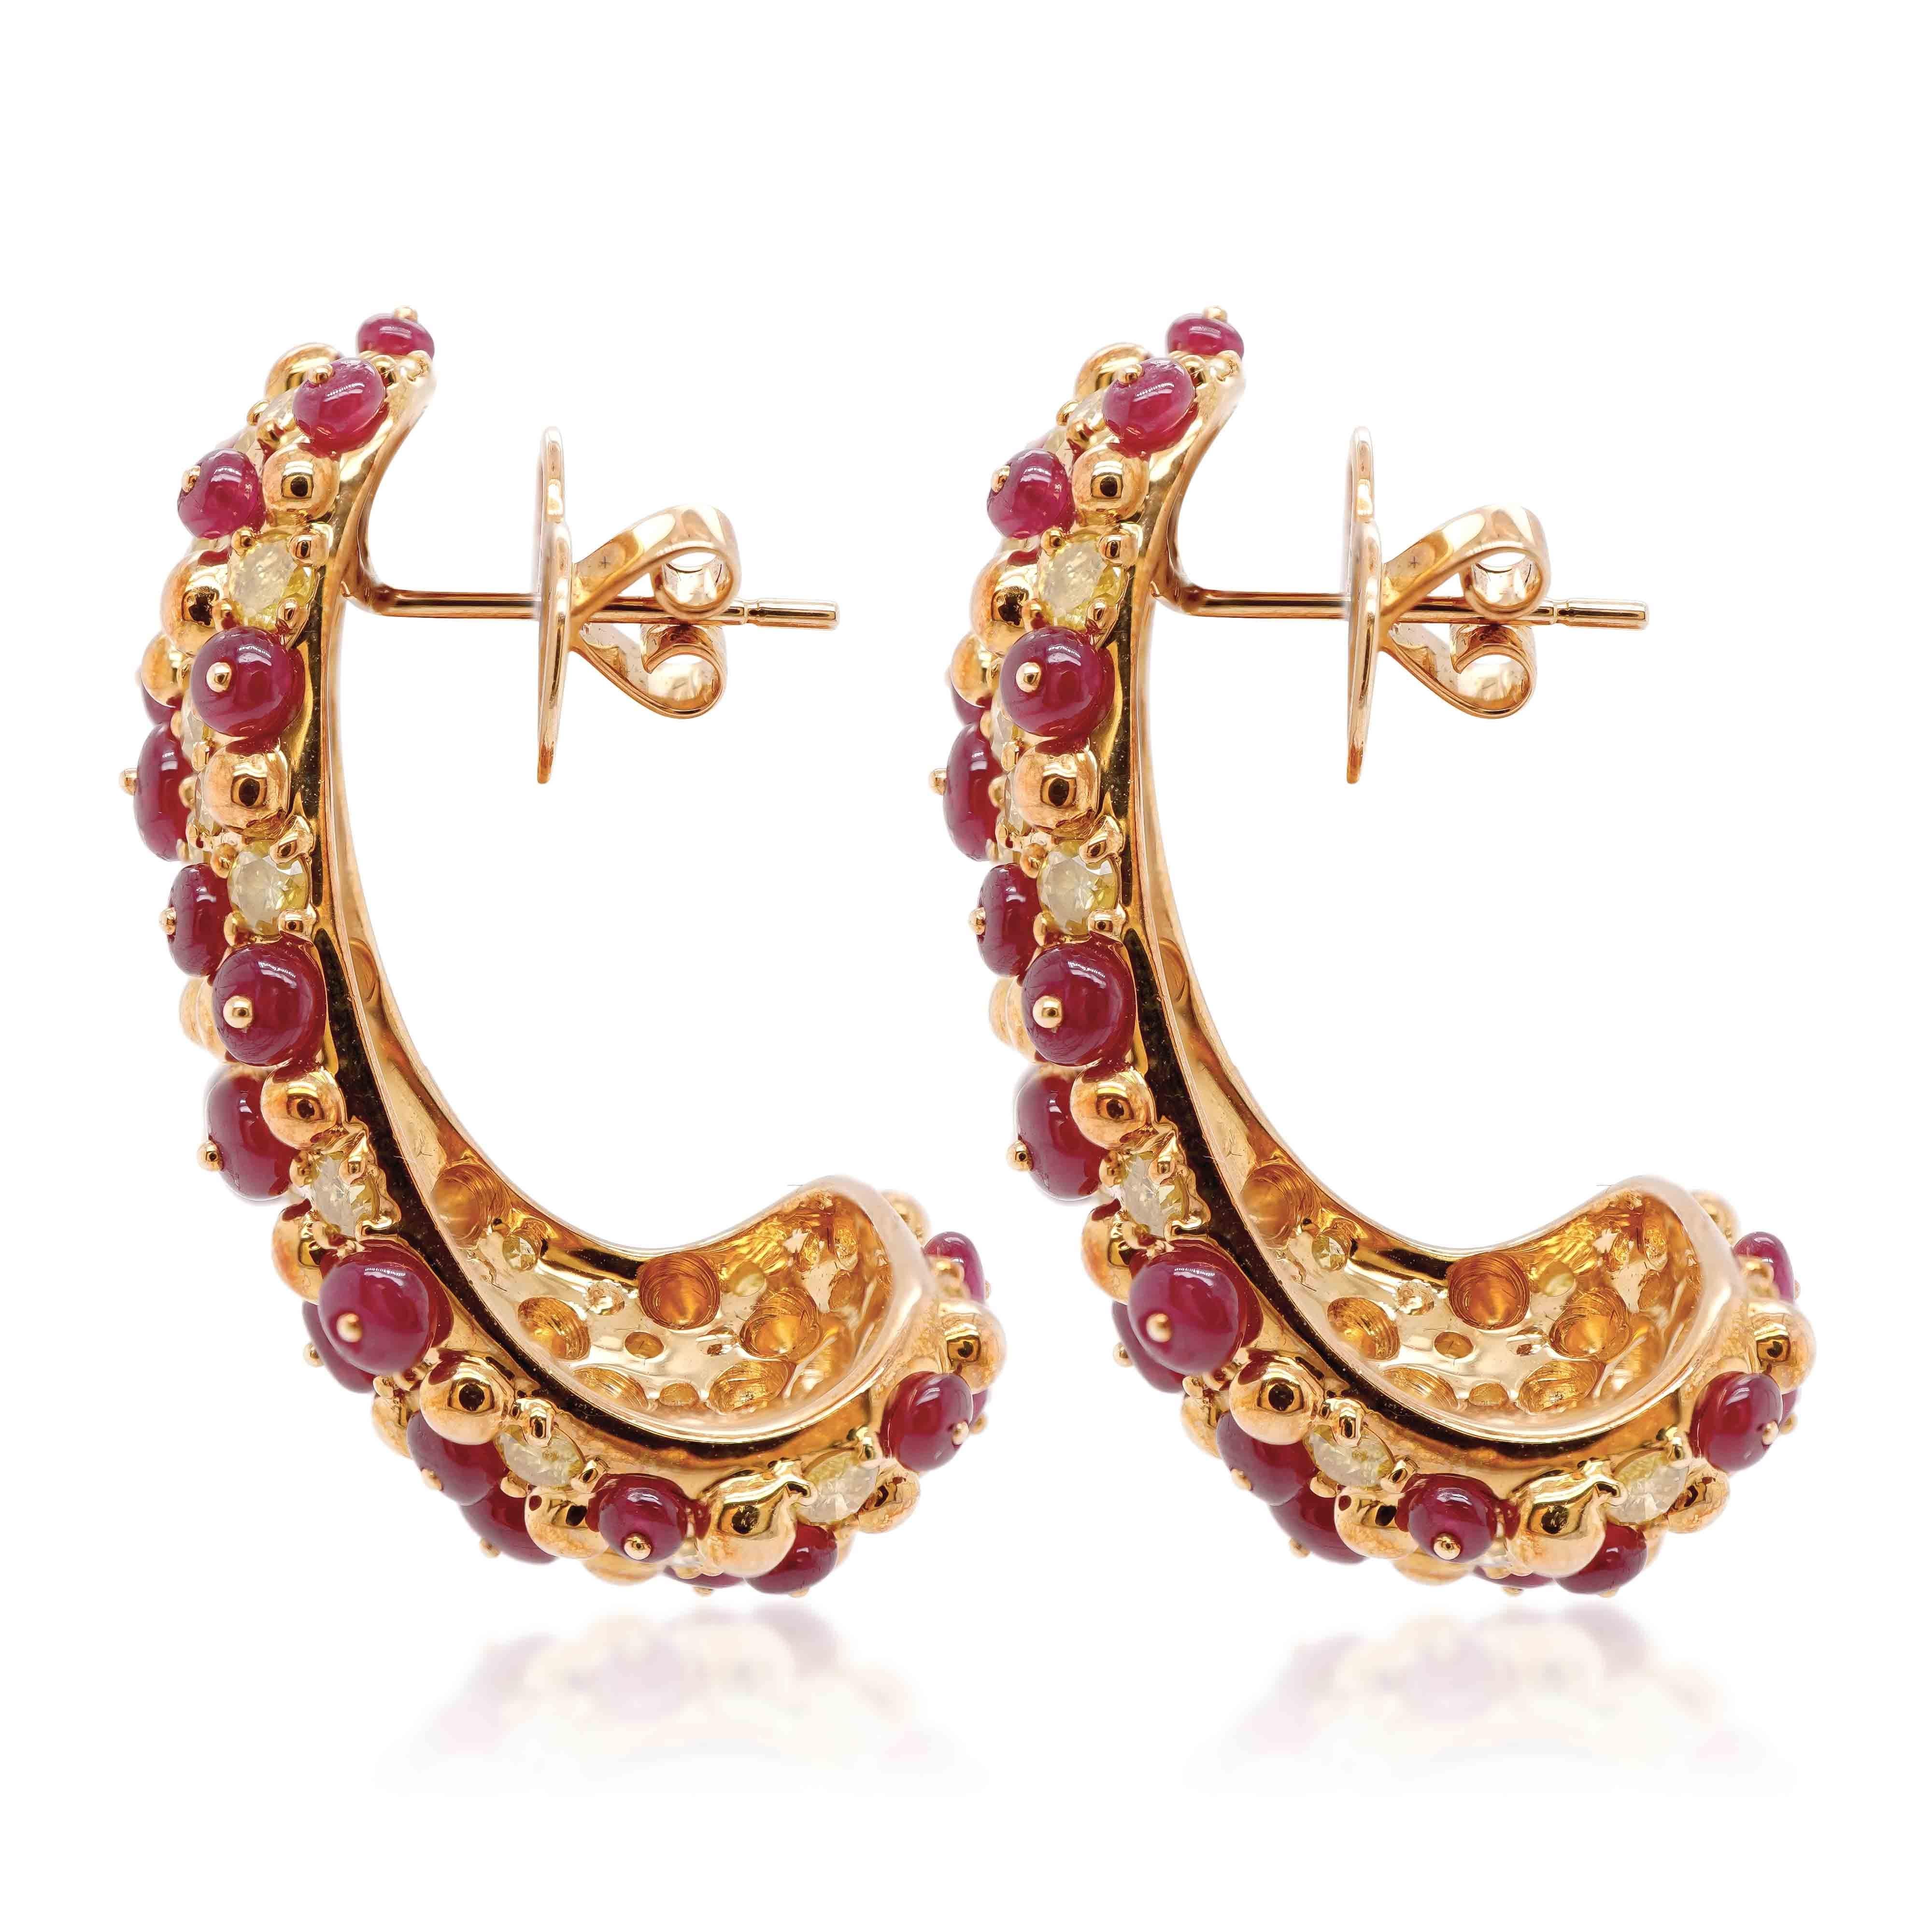 11 carats of vivid red ruby is set in the earring along with 3.81 carats of natural fancy vivid yellow round brilliant diamonds. The earring is a great combination of gemstones and fancy color diamond. A must wear for red carpet events 
